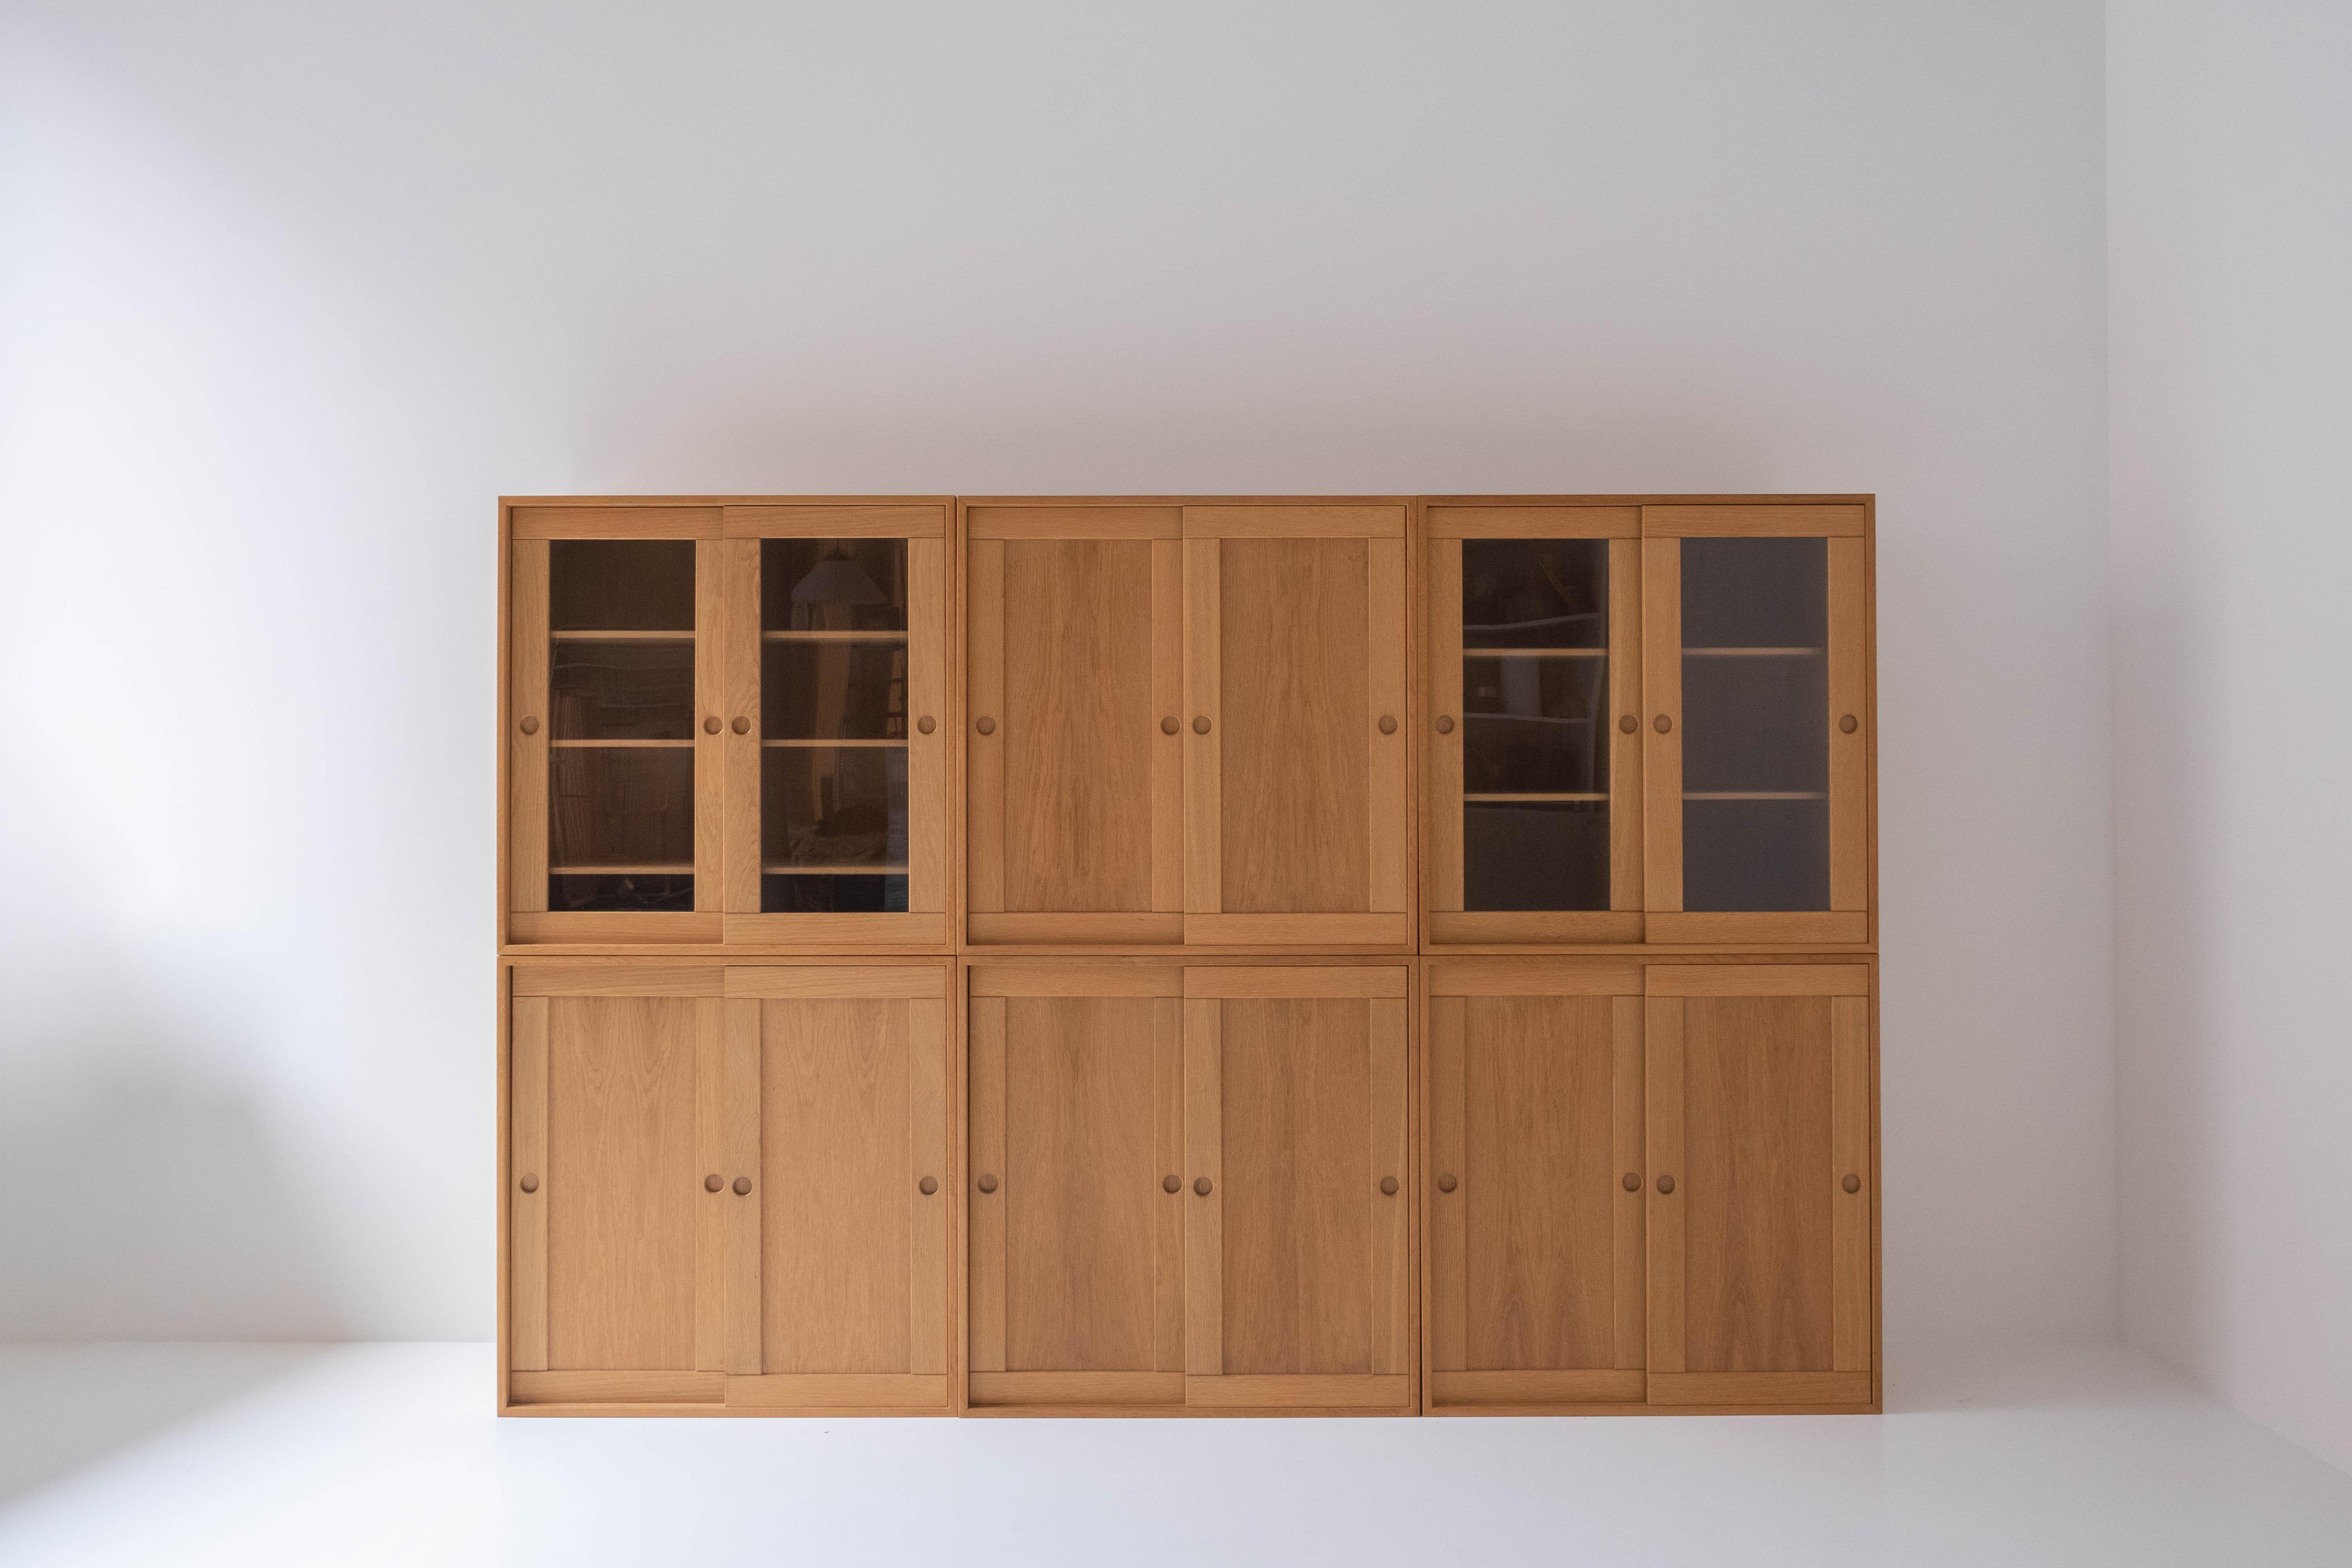 Storage unit by Børge Mogensen for Karl Andersson & Son, Sweden 1955. This modular ‘Øresund’ unit features 6 individual cabinets that can be positioned in any preferred composition. These cabinets are made out of oak and in overall well presented